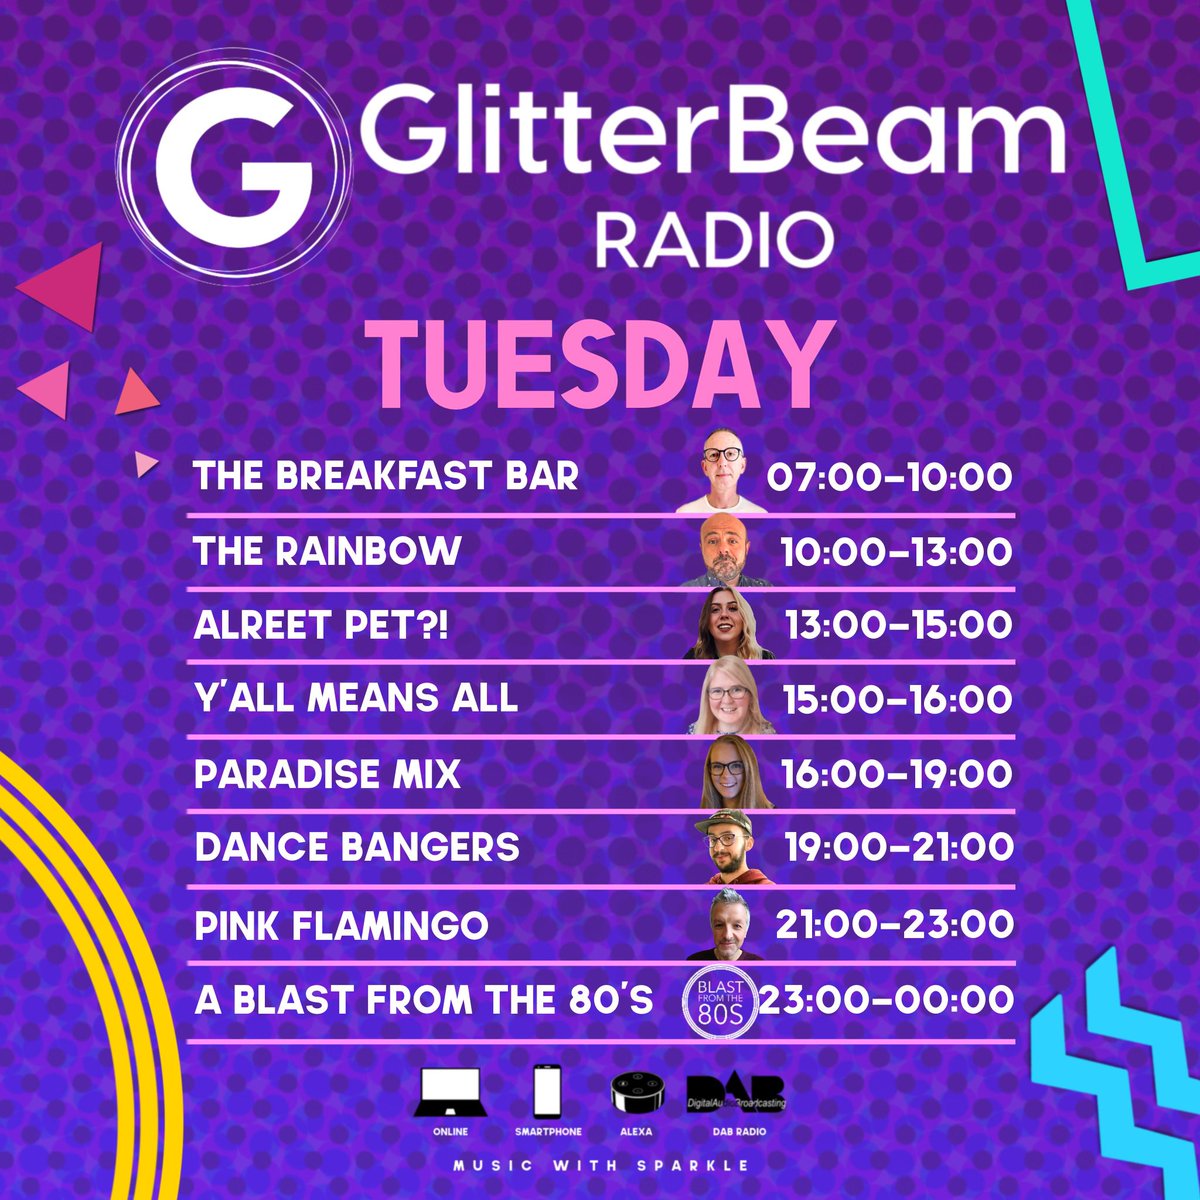 I'm up at 9 on @GlitterBeamUK with tunes loaded from First Choice, Blessed Madonna, Cakes da Killa, Arca, Björk + Shygirl, Sherelle, Beyoncé, Fever Ray, Sheila B. Devotion, Planningtorock, CSS, SYREETA, Yves Tumor, BAMBII, Romy, Avalon Emerson + more #LGBTQmusic #LGBTQradio 🏳️‍🌈